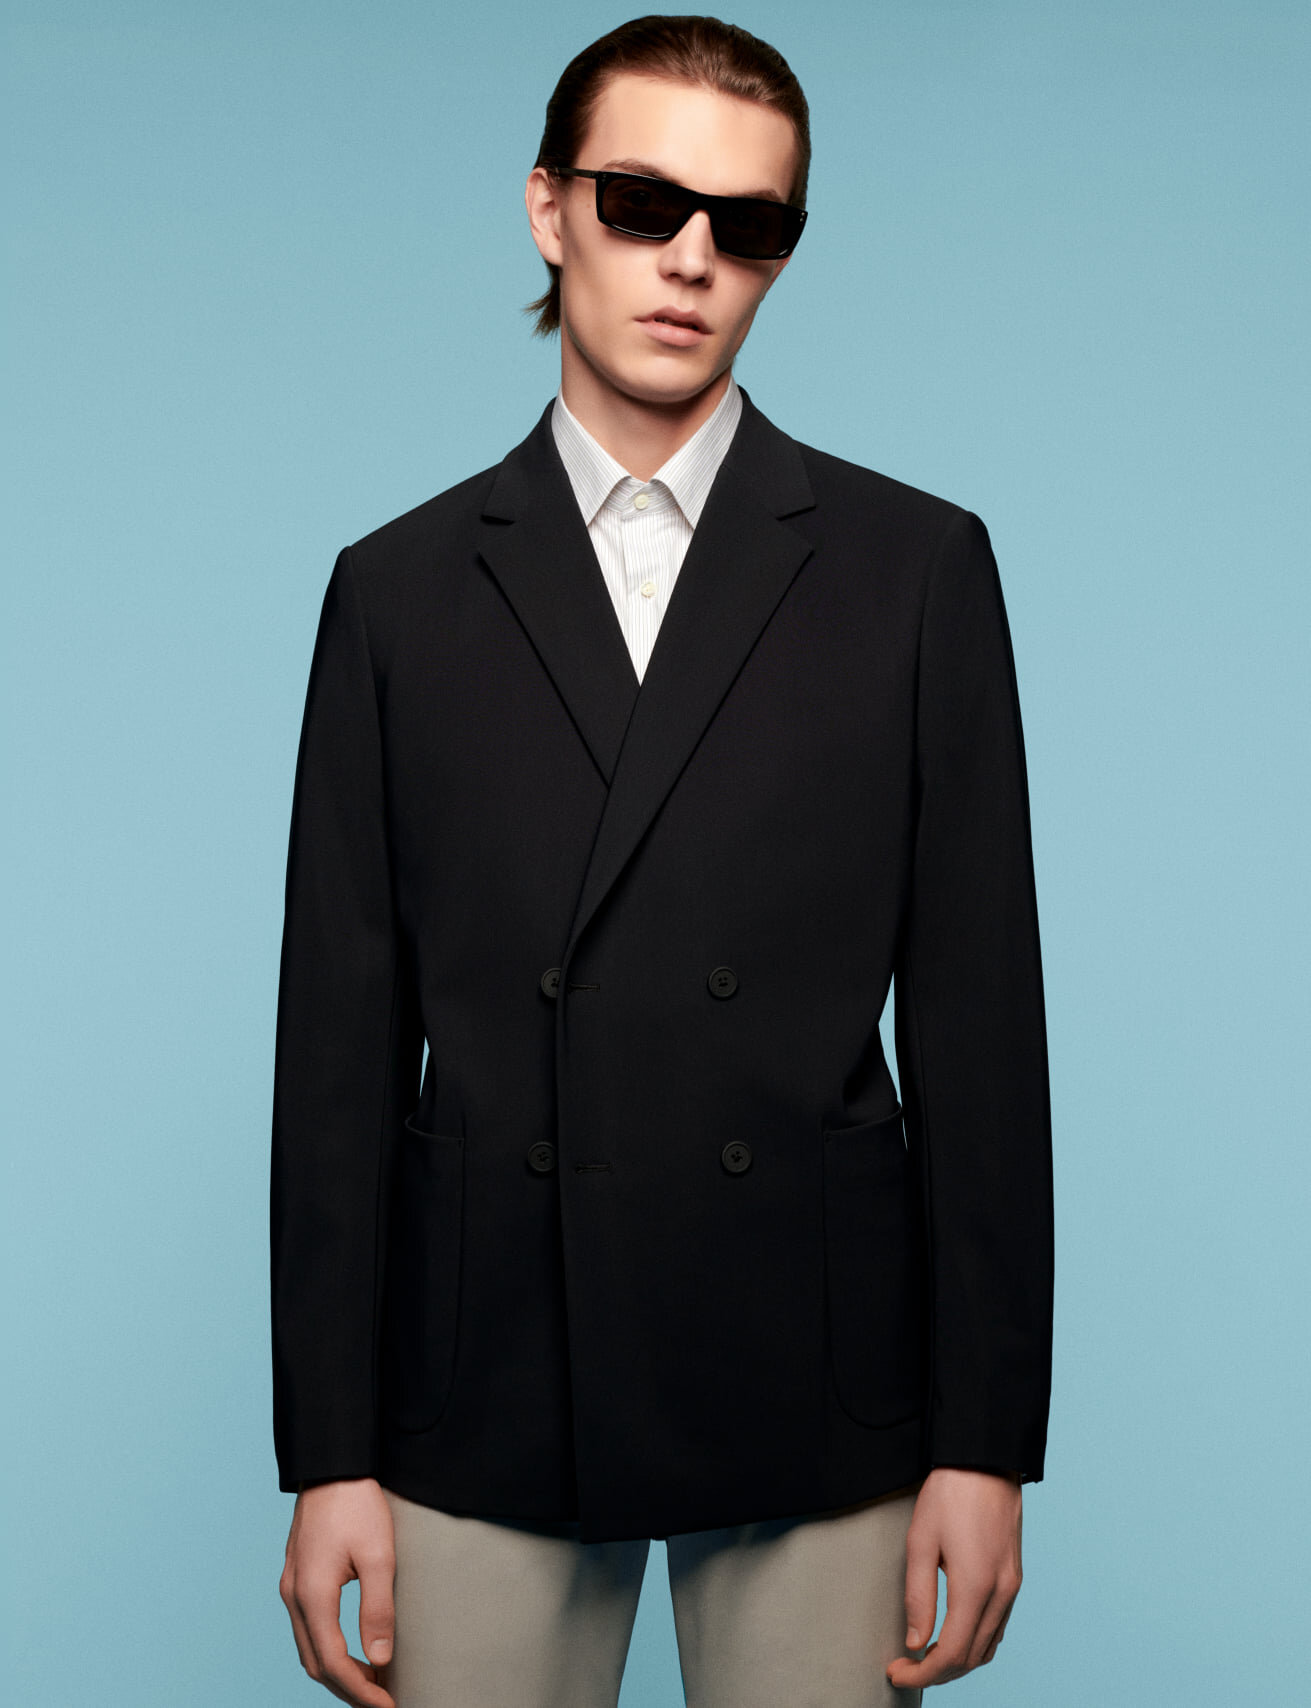 Theory release classic and functional menswear collection for SS21 ...